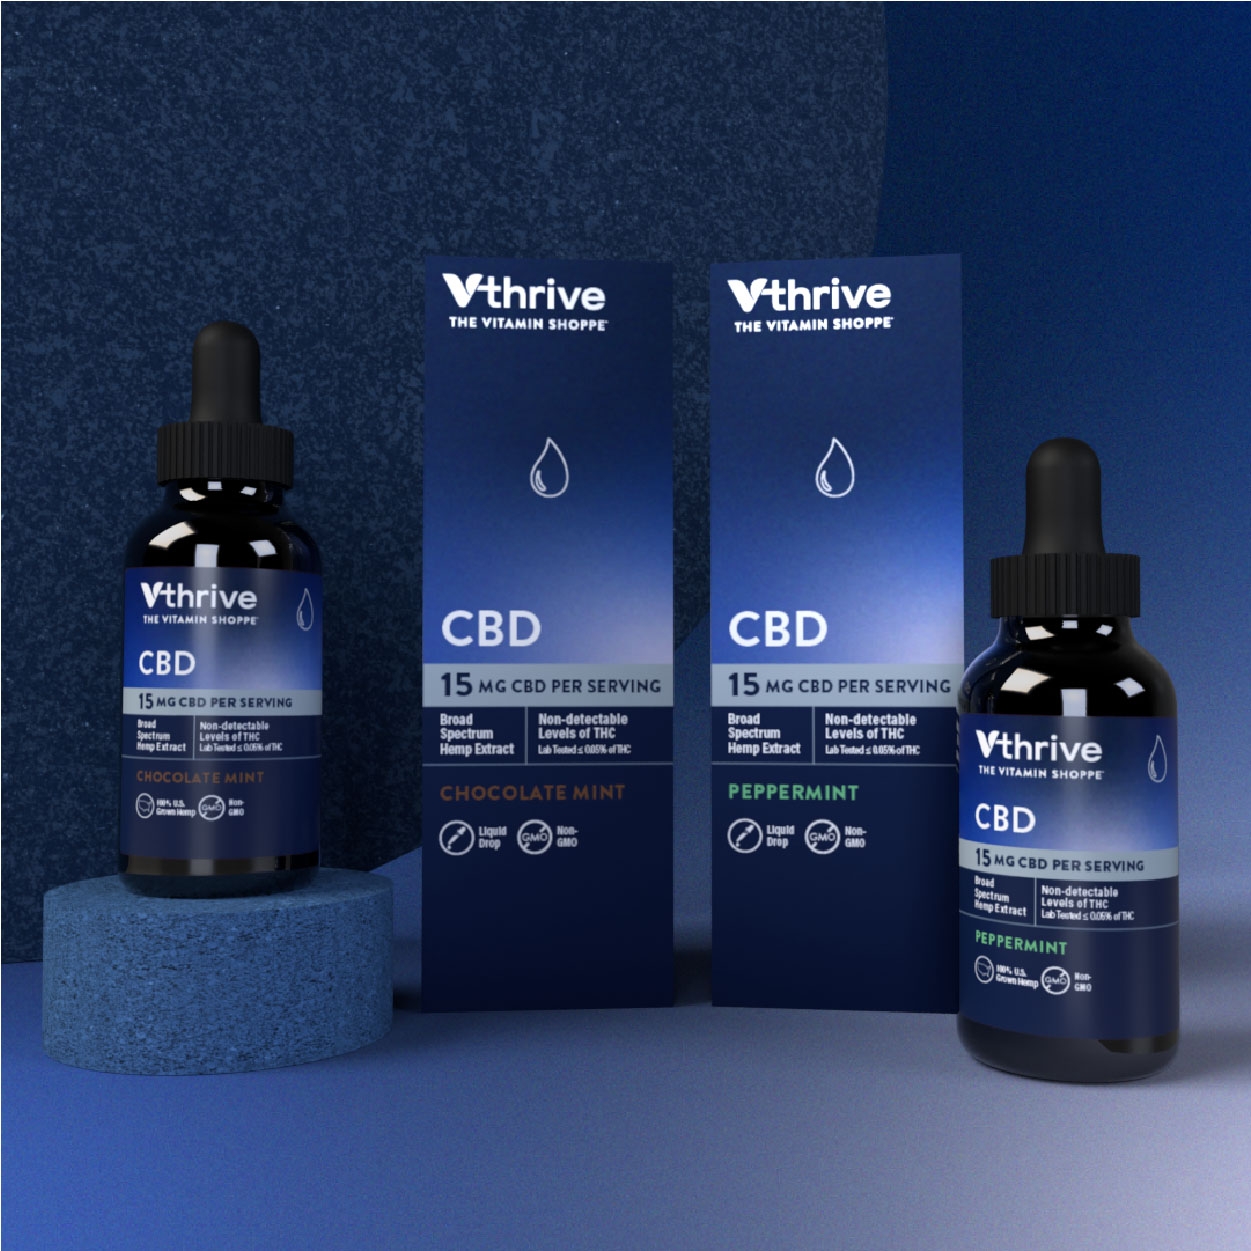 Vitamin Shoppe Joins the CBD Movement with New Private-Label Offerings